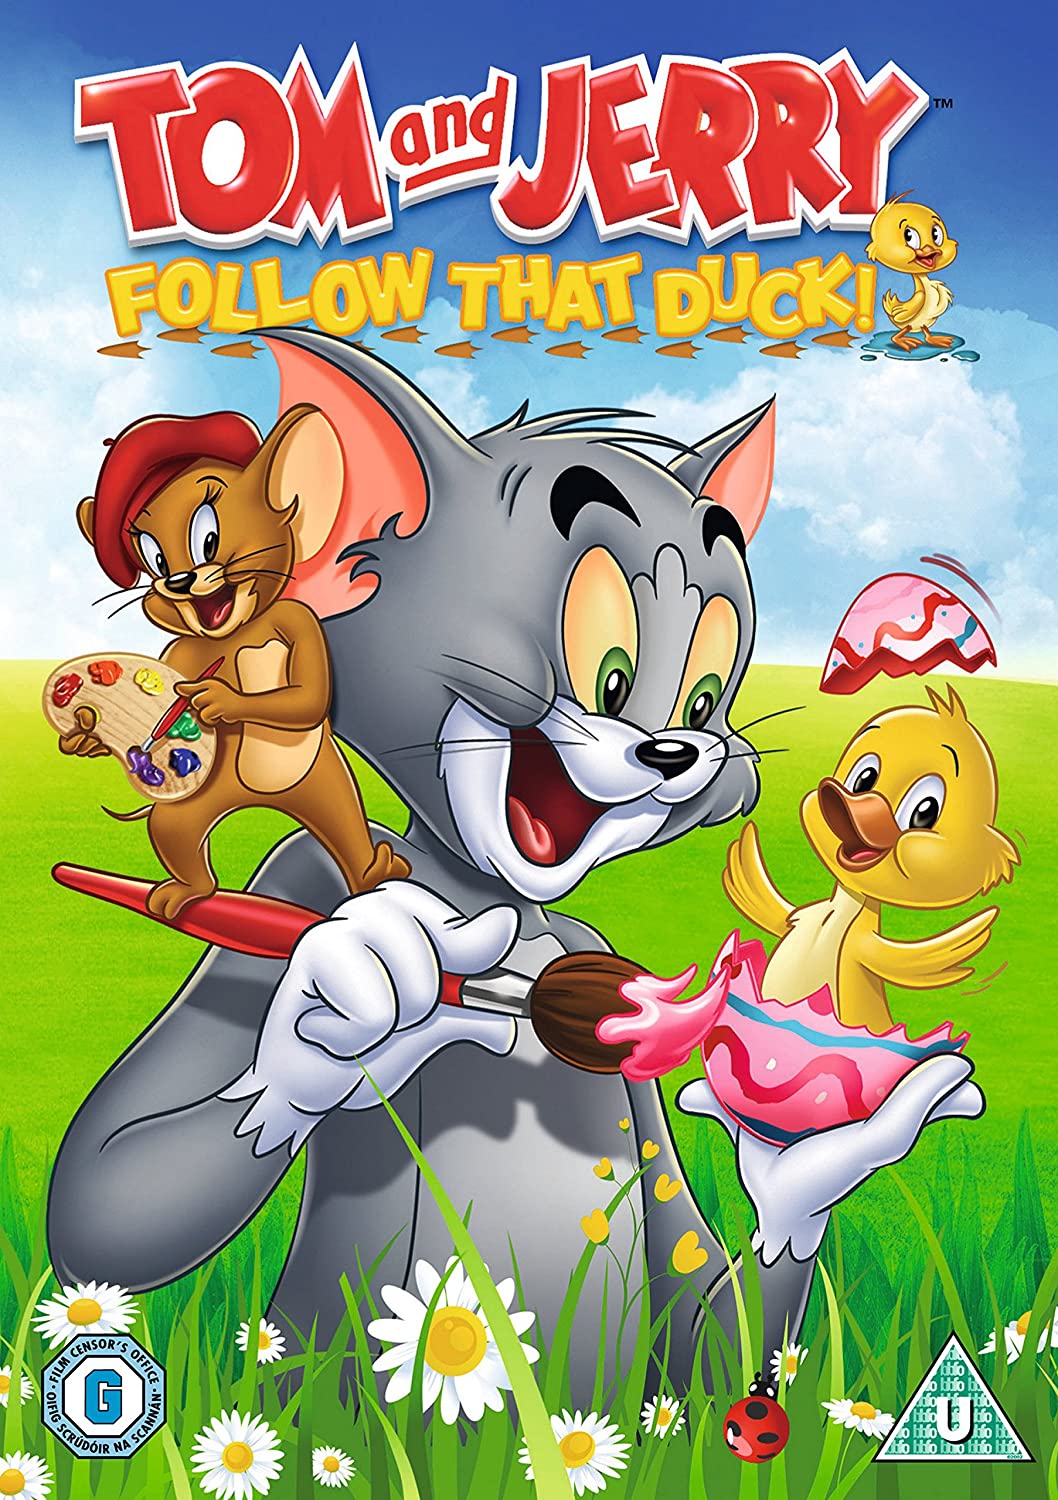 Tom And Jerry: Follow That Duck [1958] [2013] - Family/Musical [DVD]